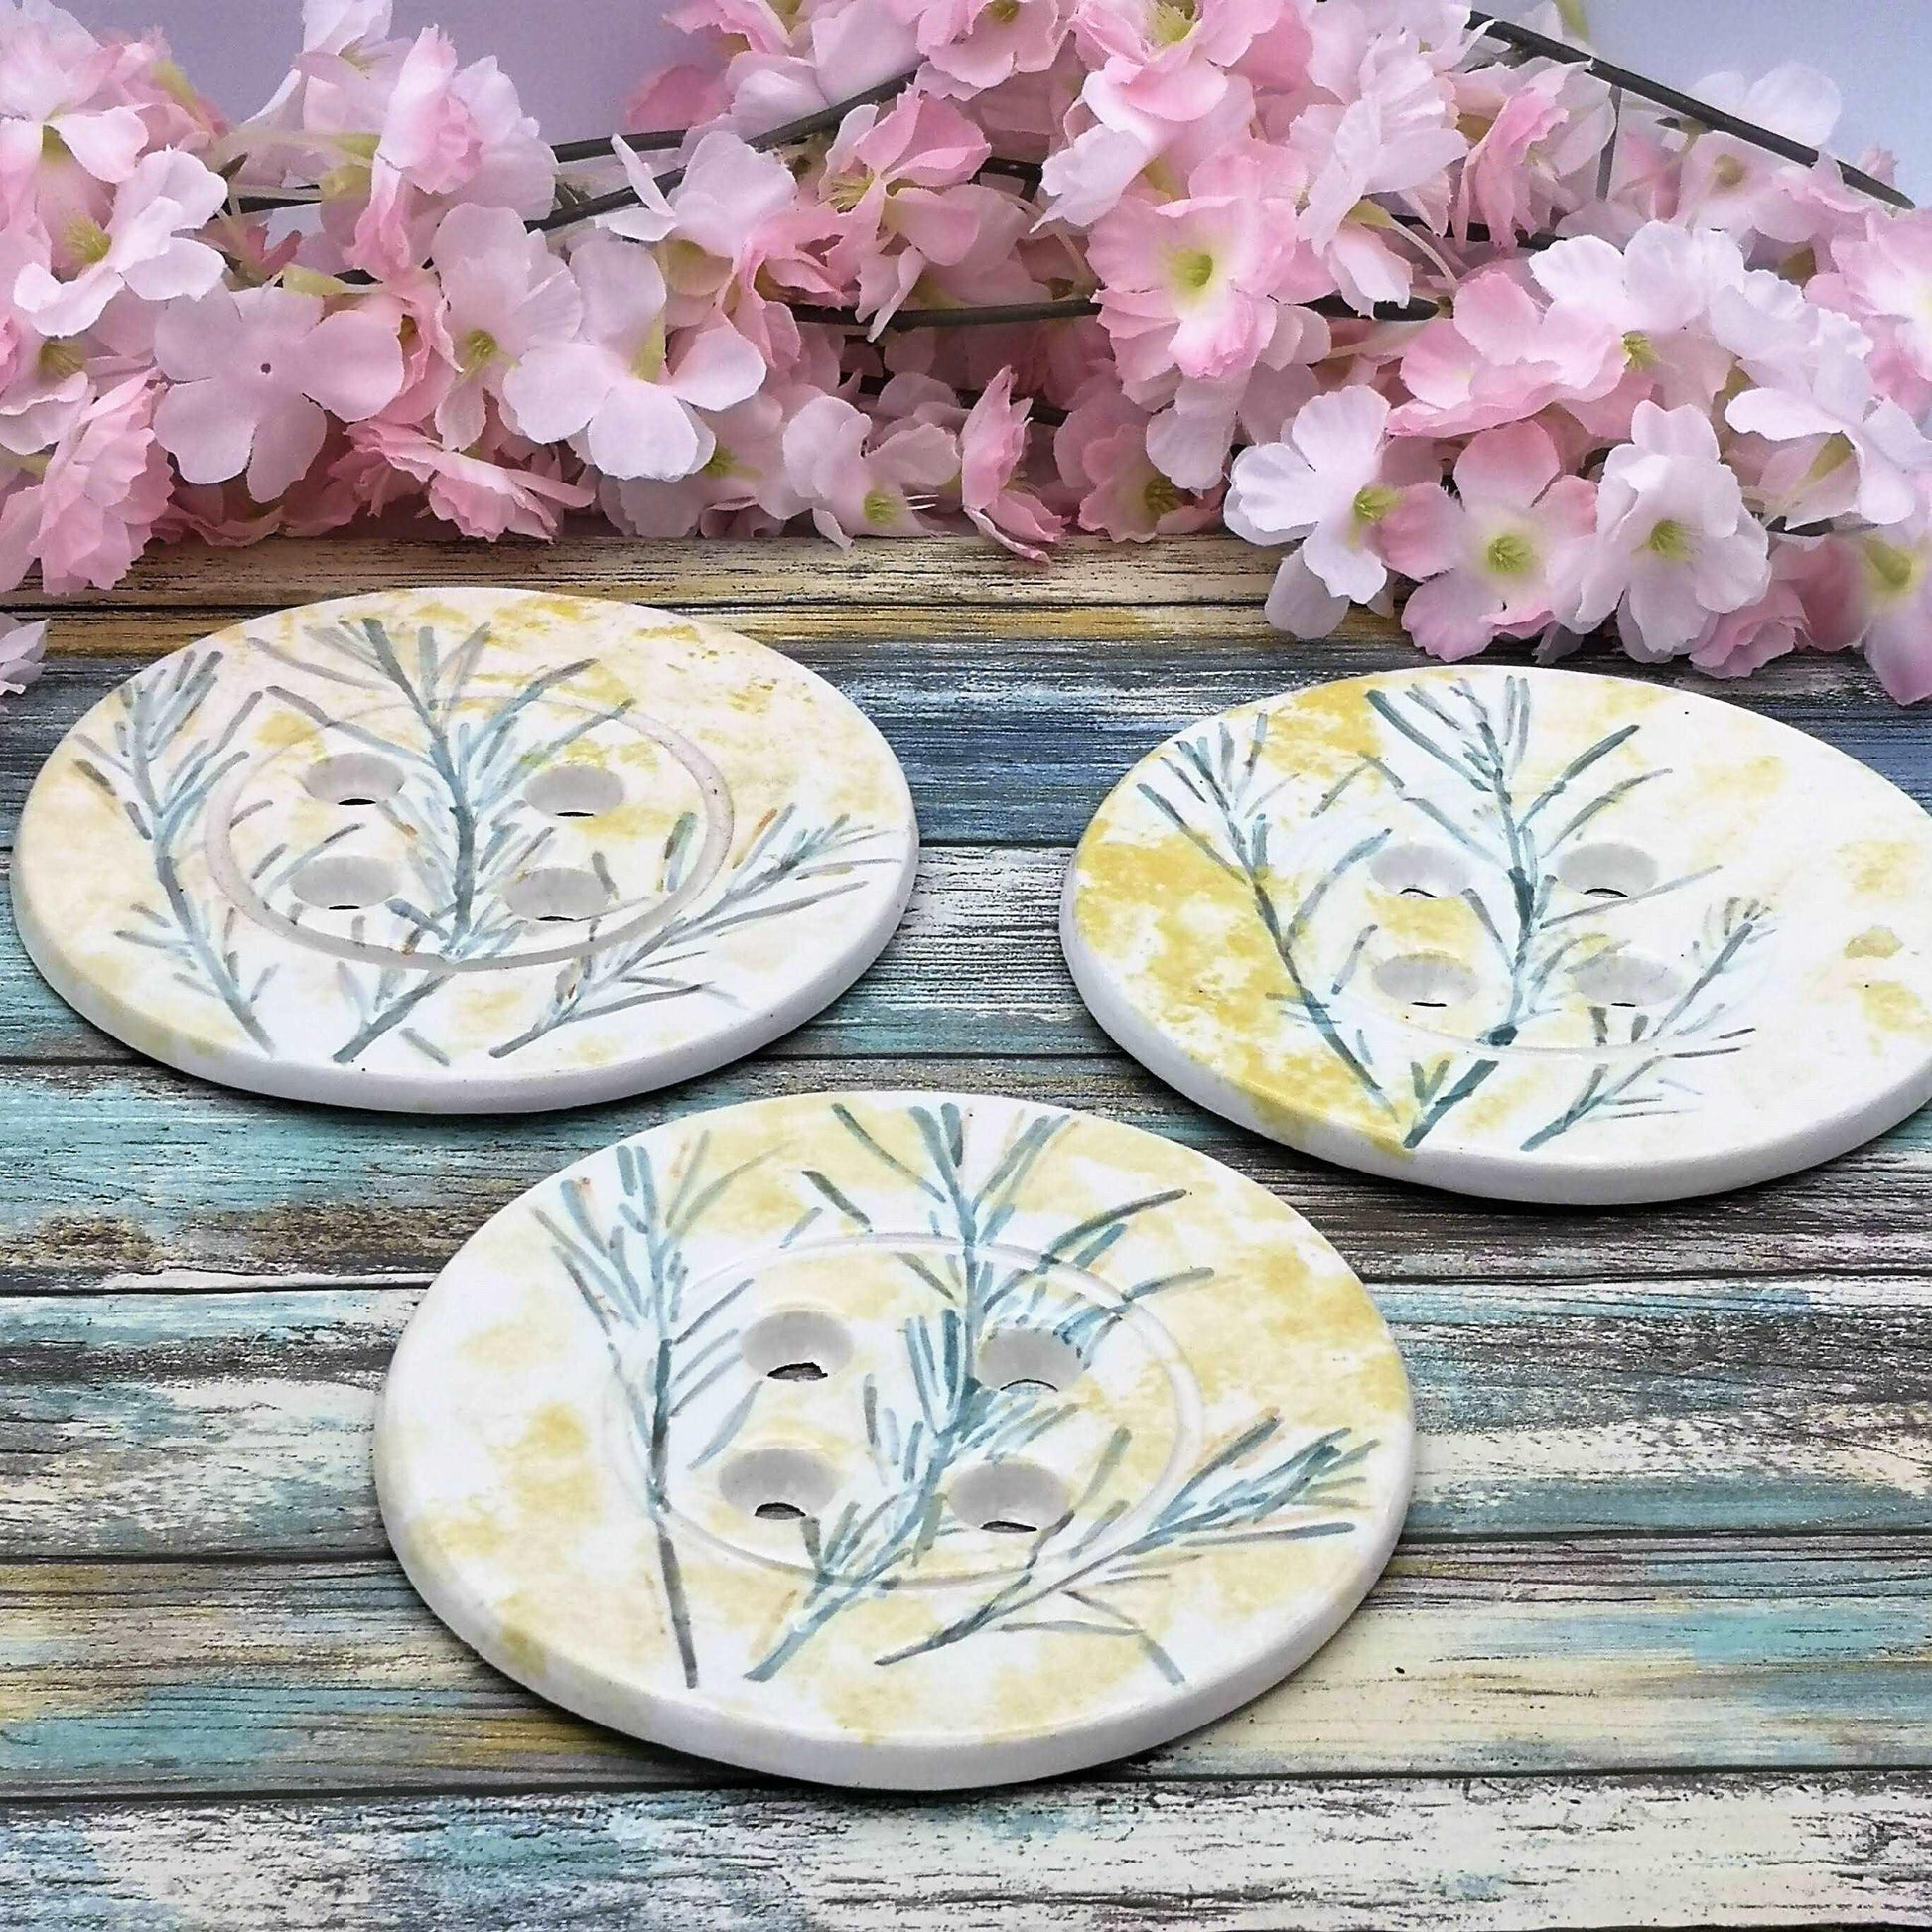 1Pc 145mm Giant Round Sewing Buttons Wall Art, Mothers Day Gift, Handmade Ceramic Plant Mom Birthday Gift From Daughter, Best Sellers